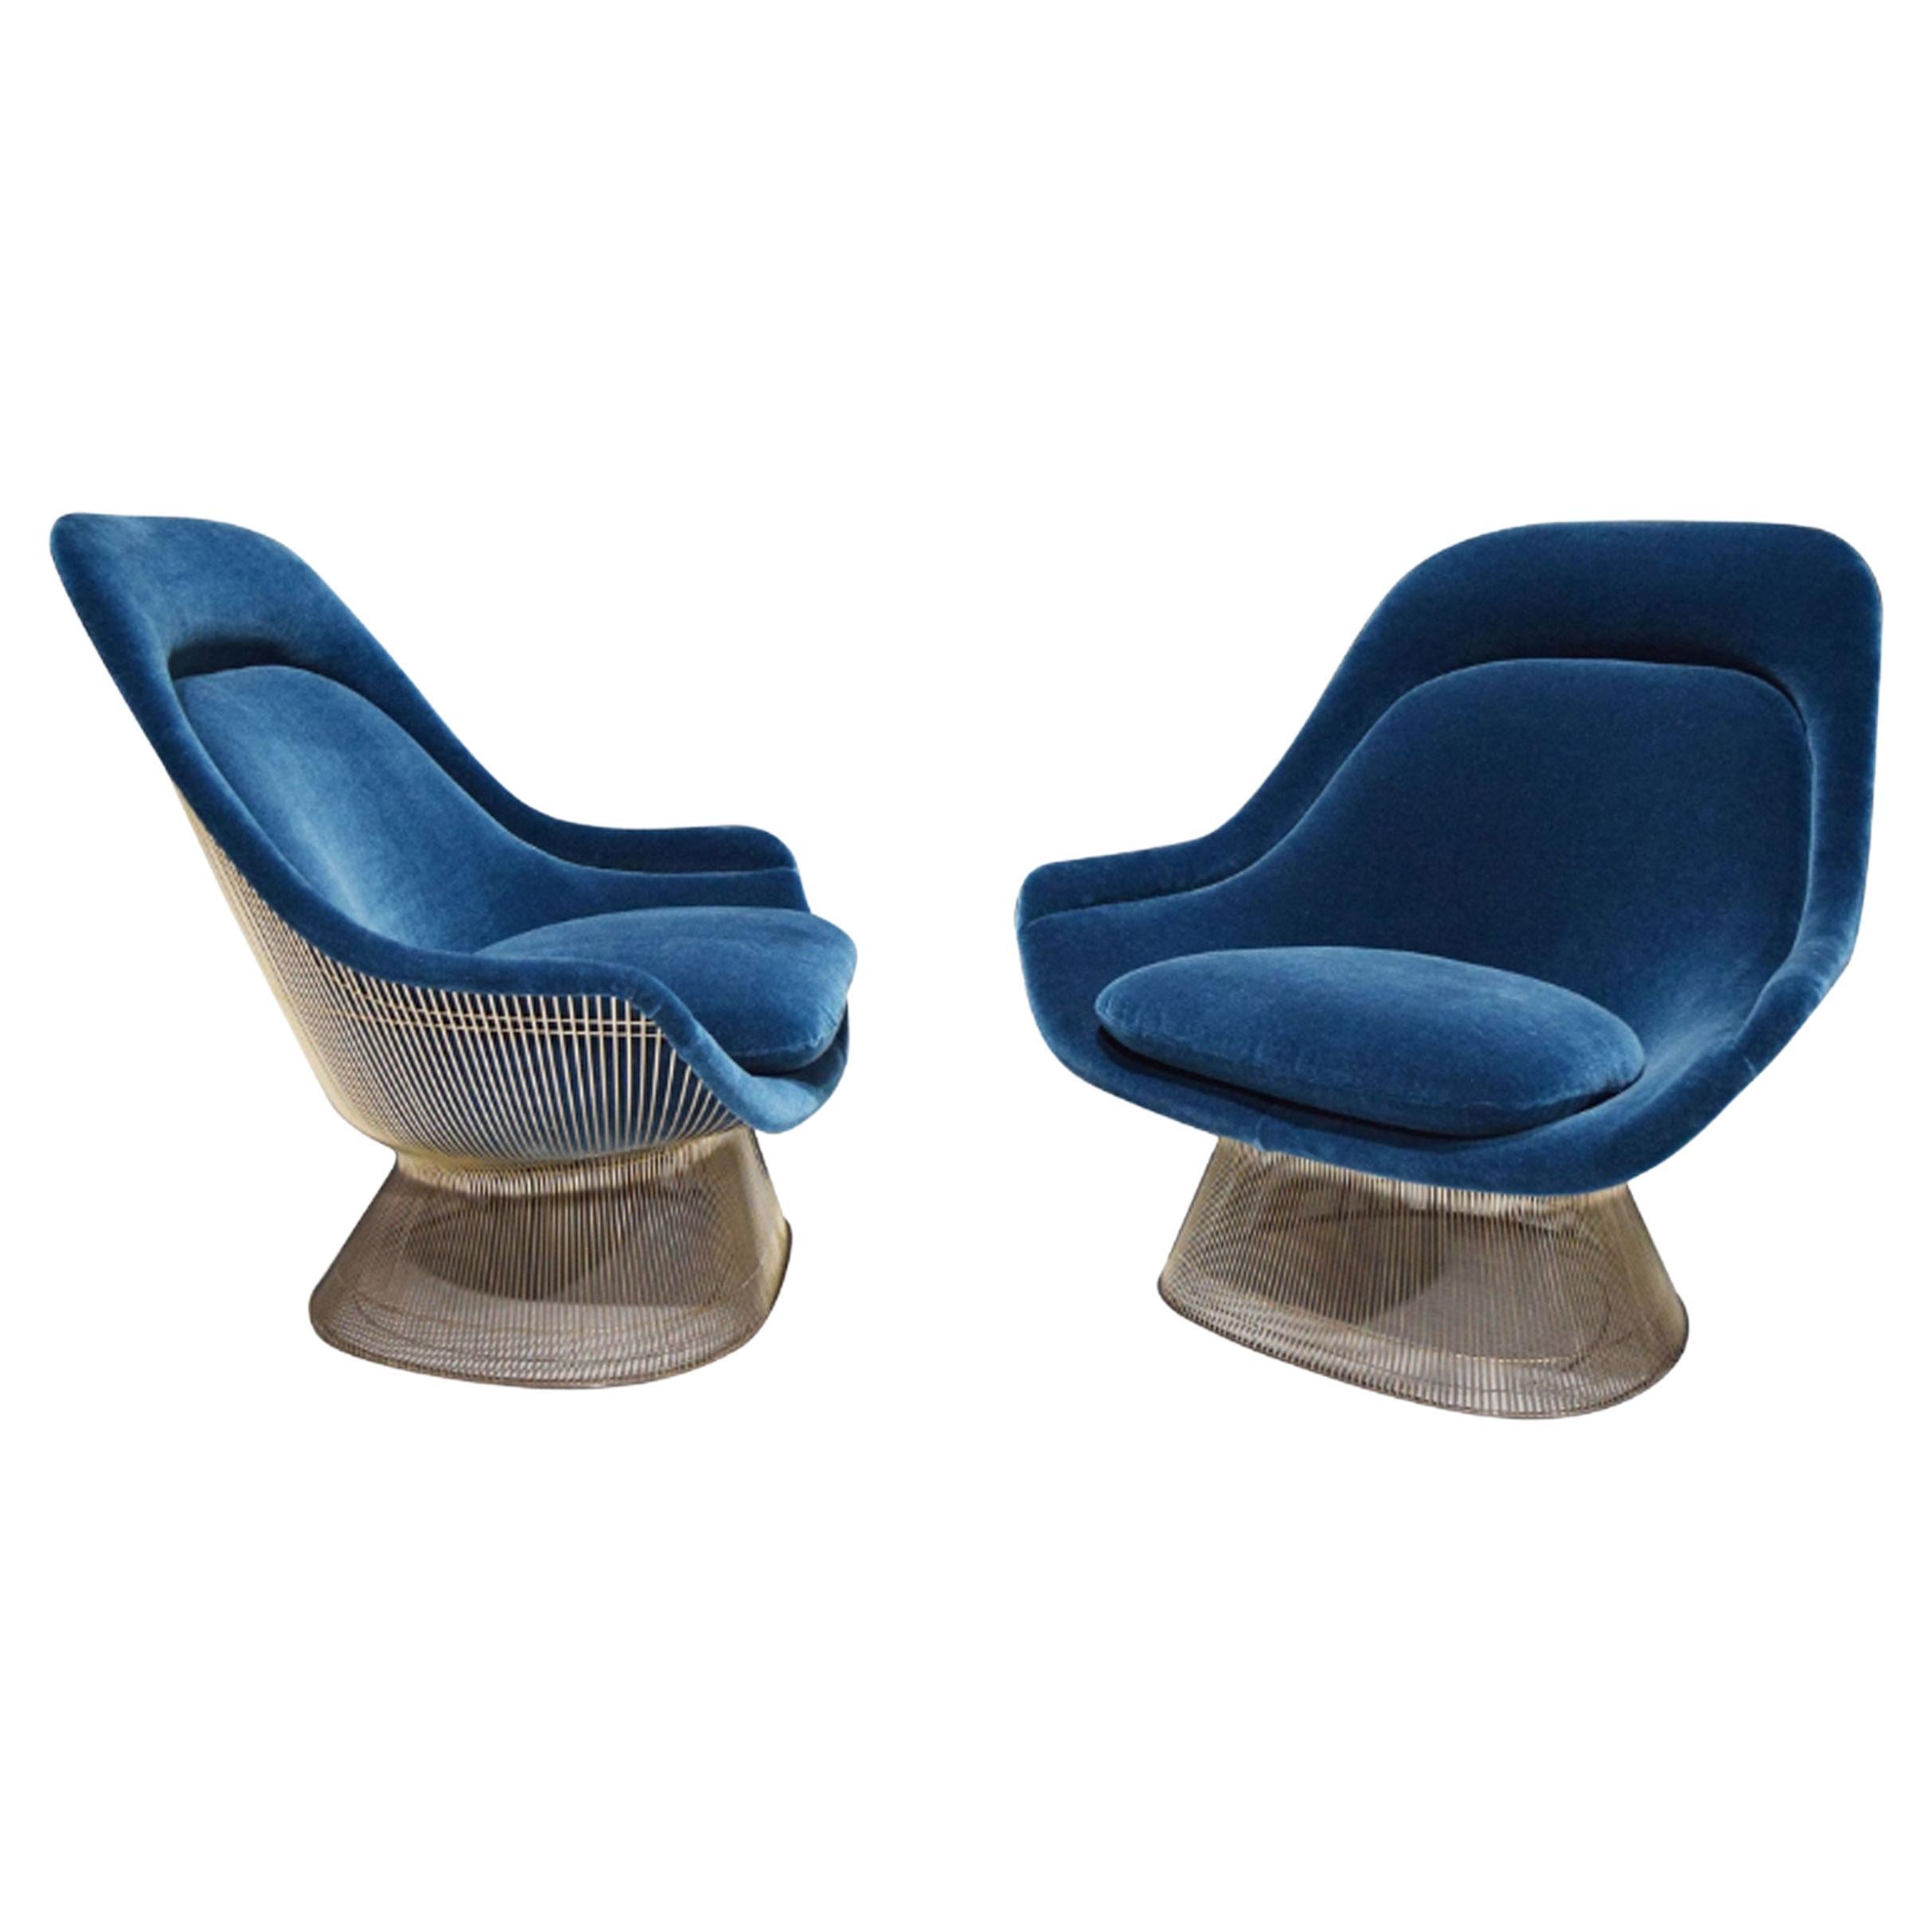 Pair of Warren Platner for Knoll Easy Chairs in Blue Mohair